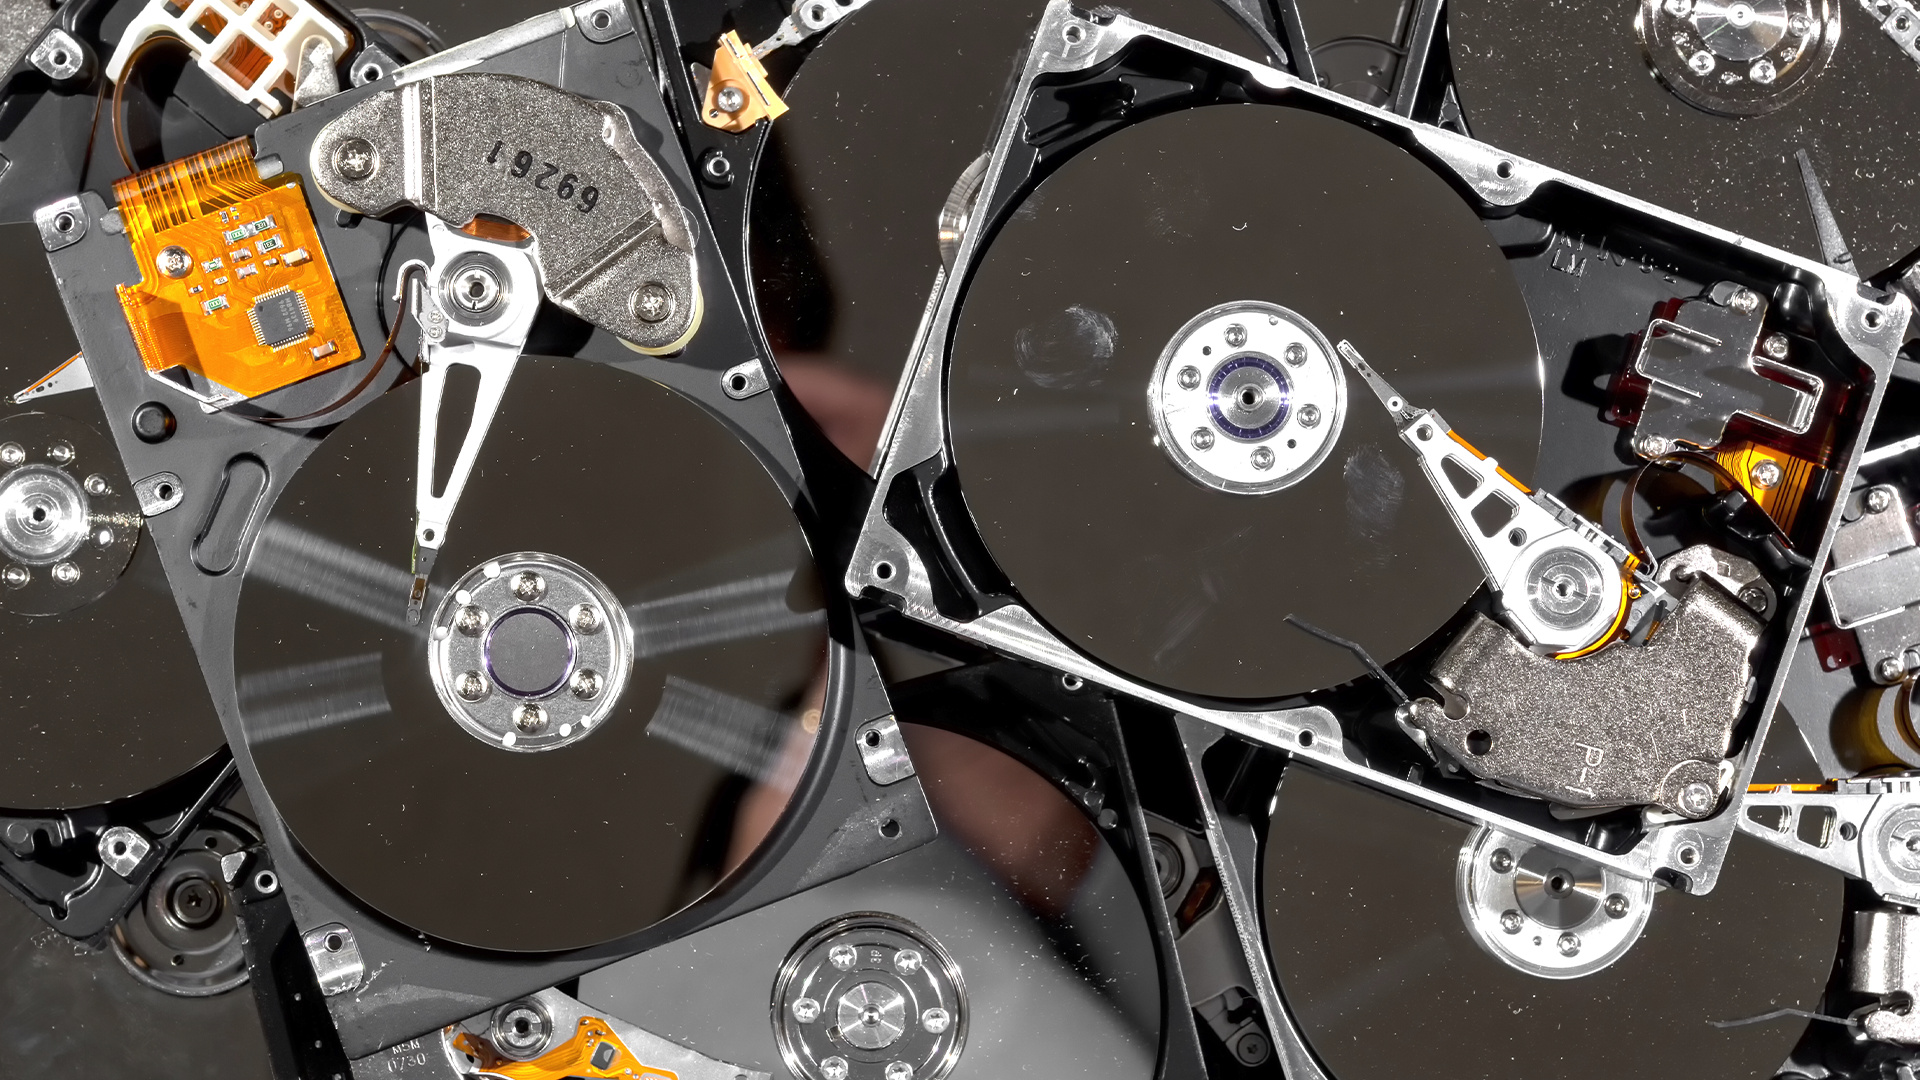 A pile of hard drives with their discs exposed. There's nasty dust and fingerprints all over the drives.